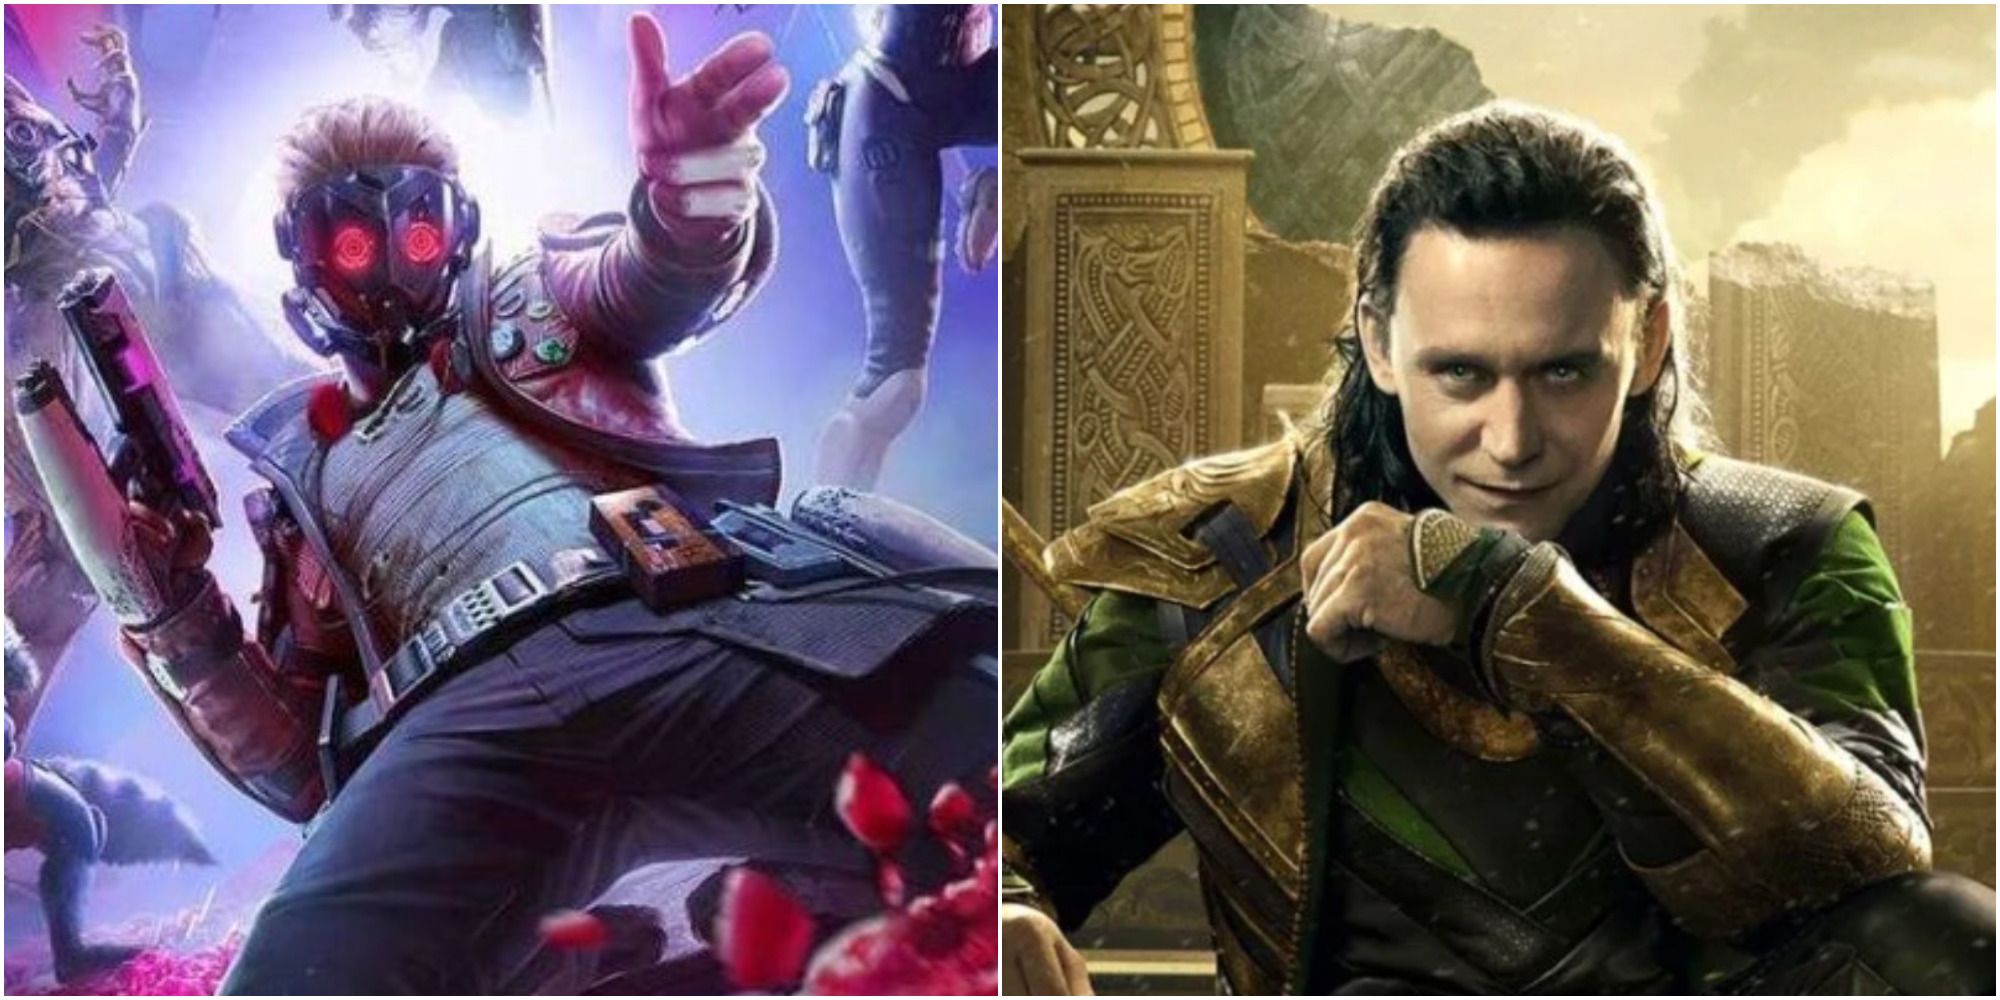 Star-Lord from Guardians of the Galaxy game and Loki from the MCU